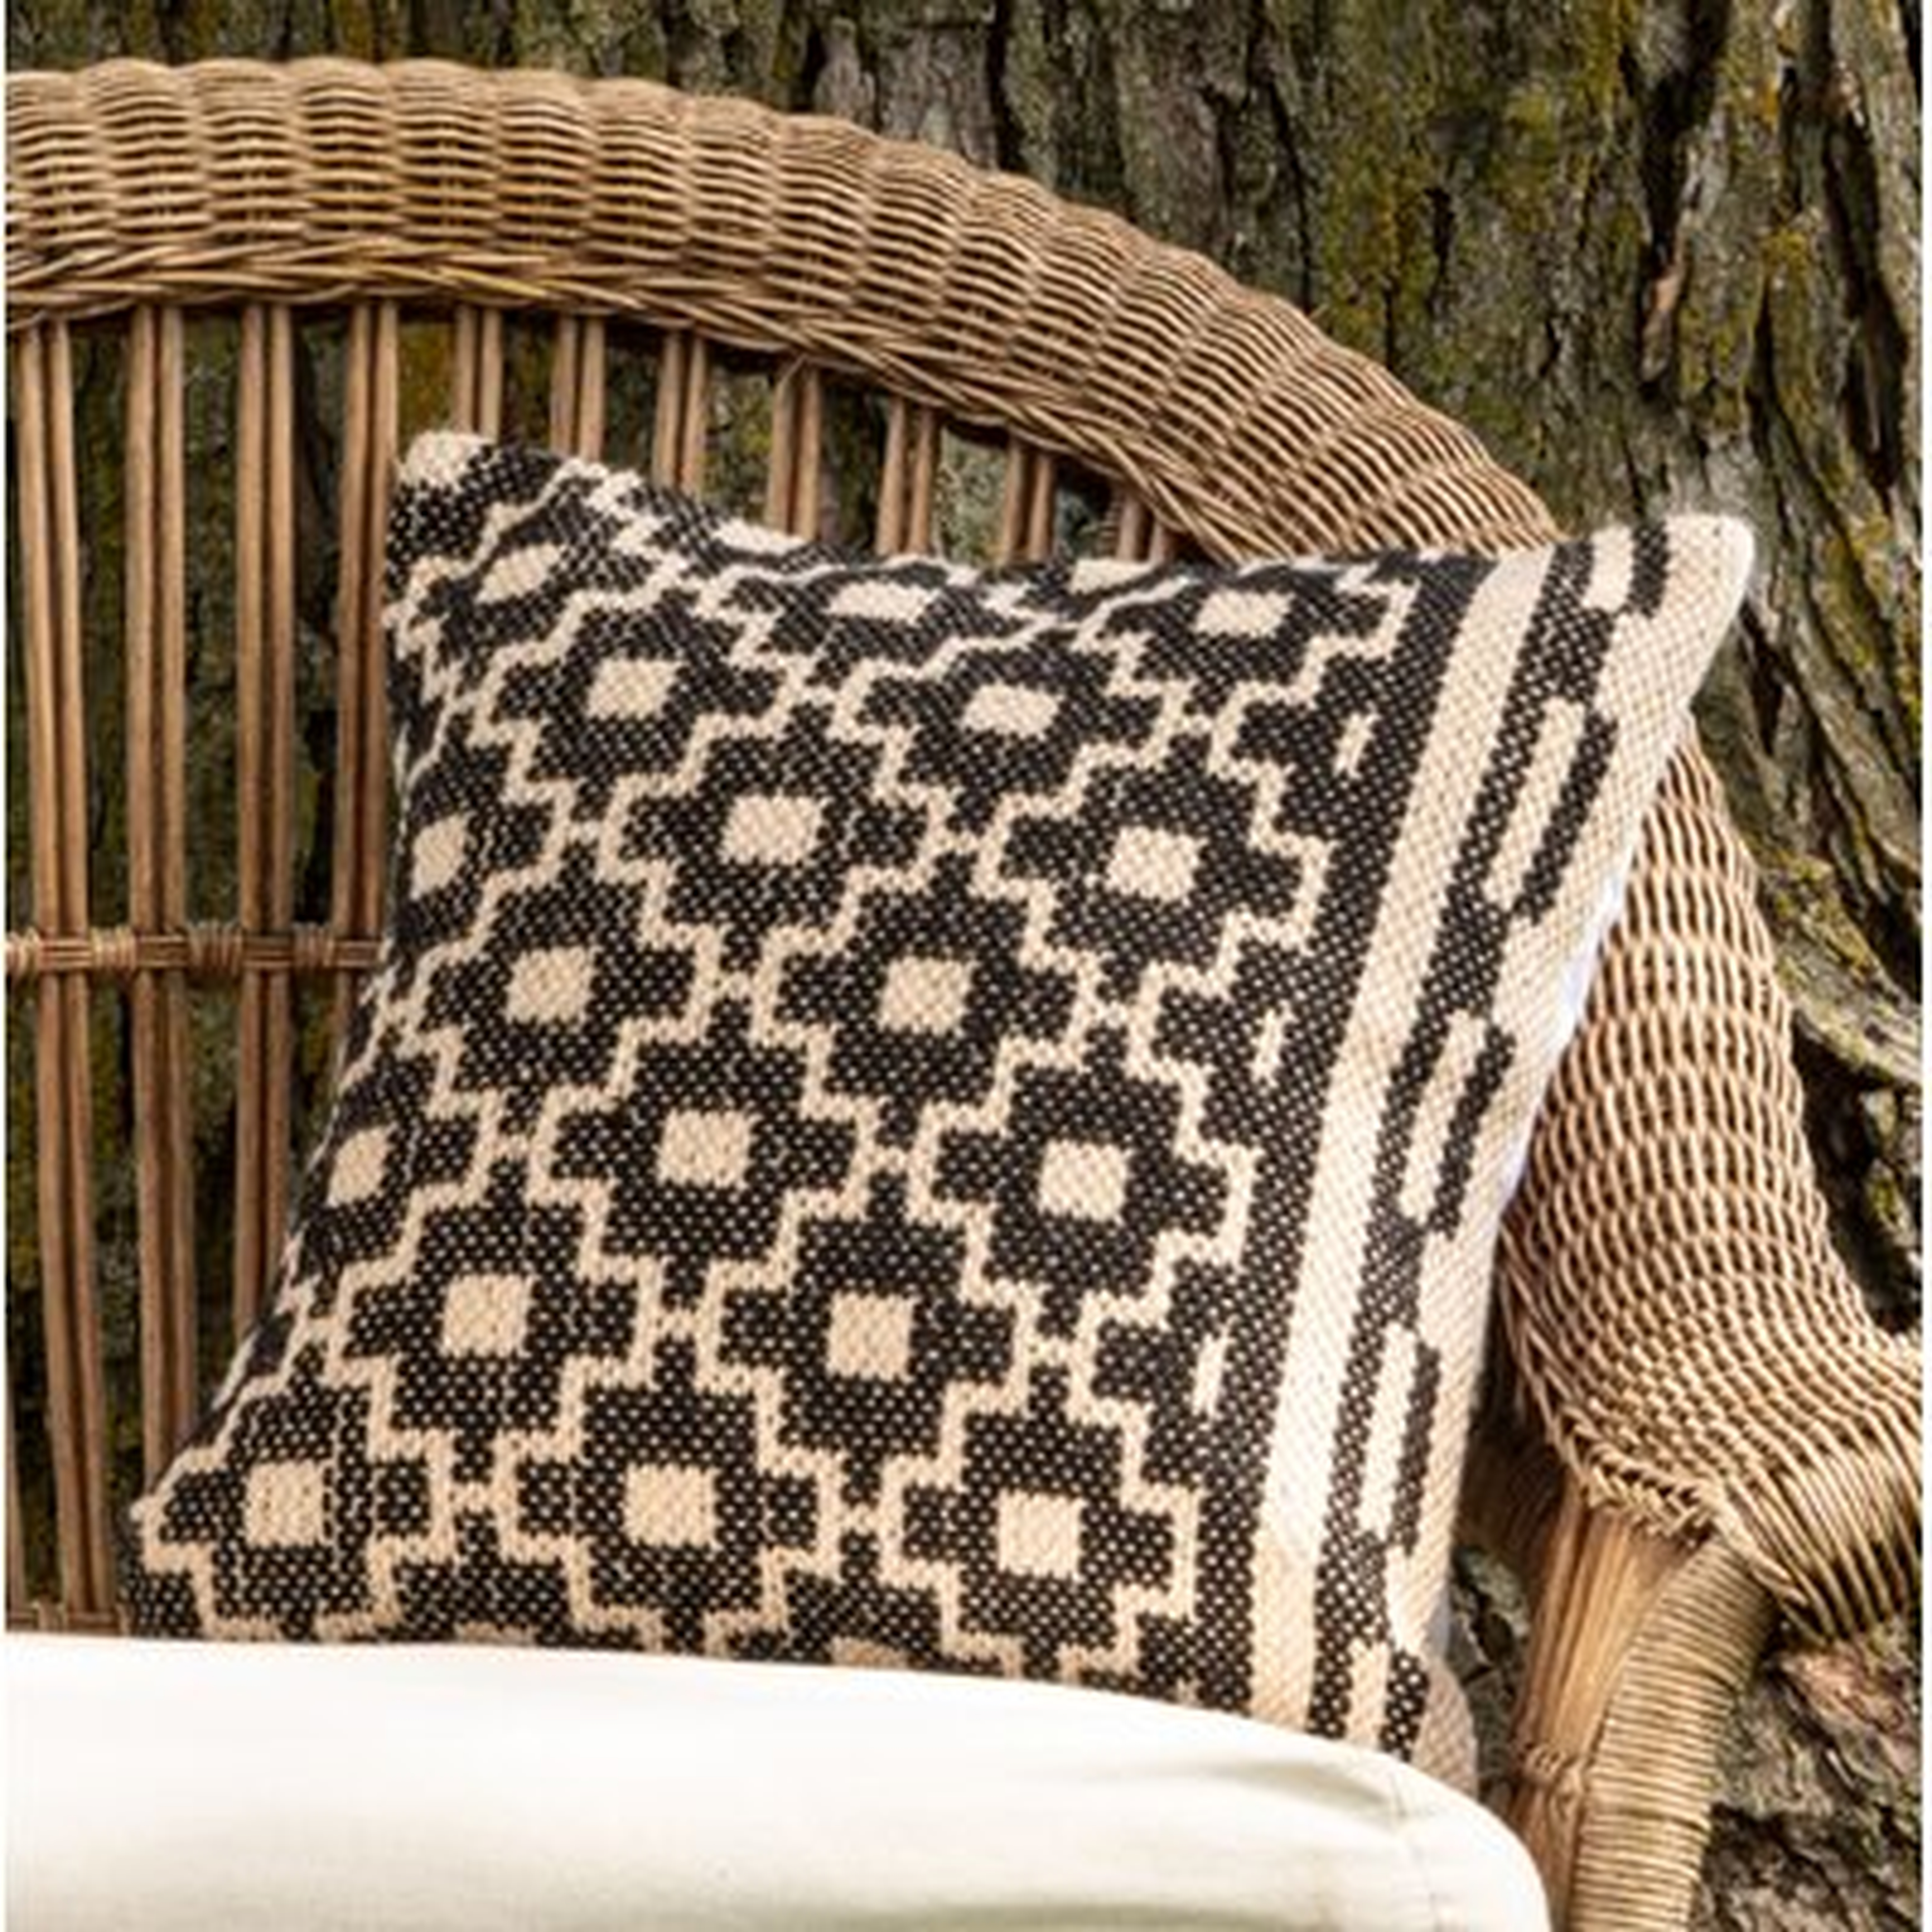 Hand Woven Decorative Outdoor Square Pillow Cover & Insert - Wayfair